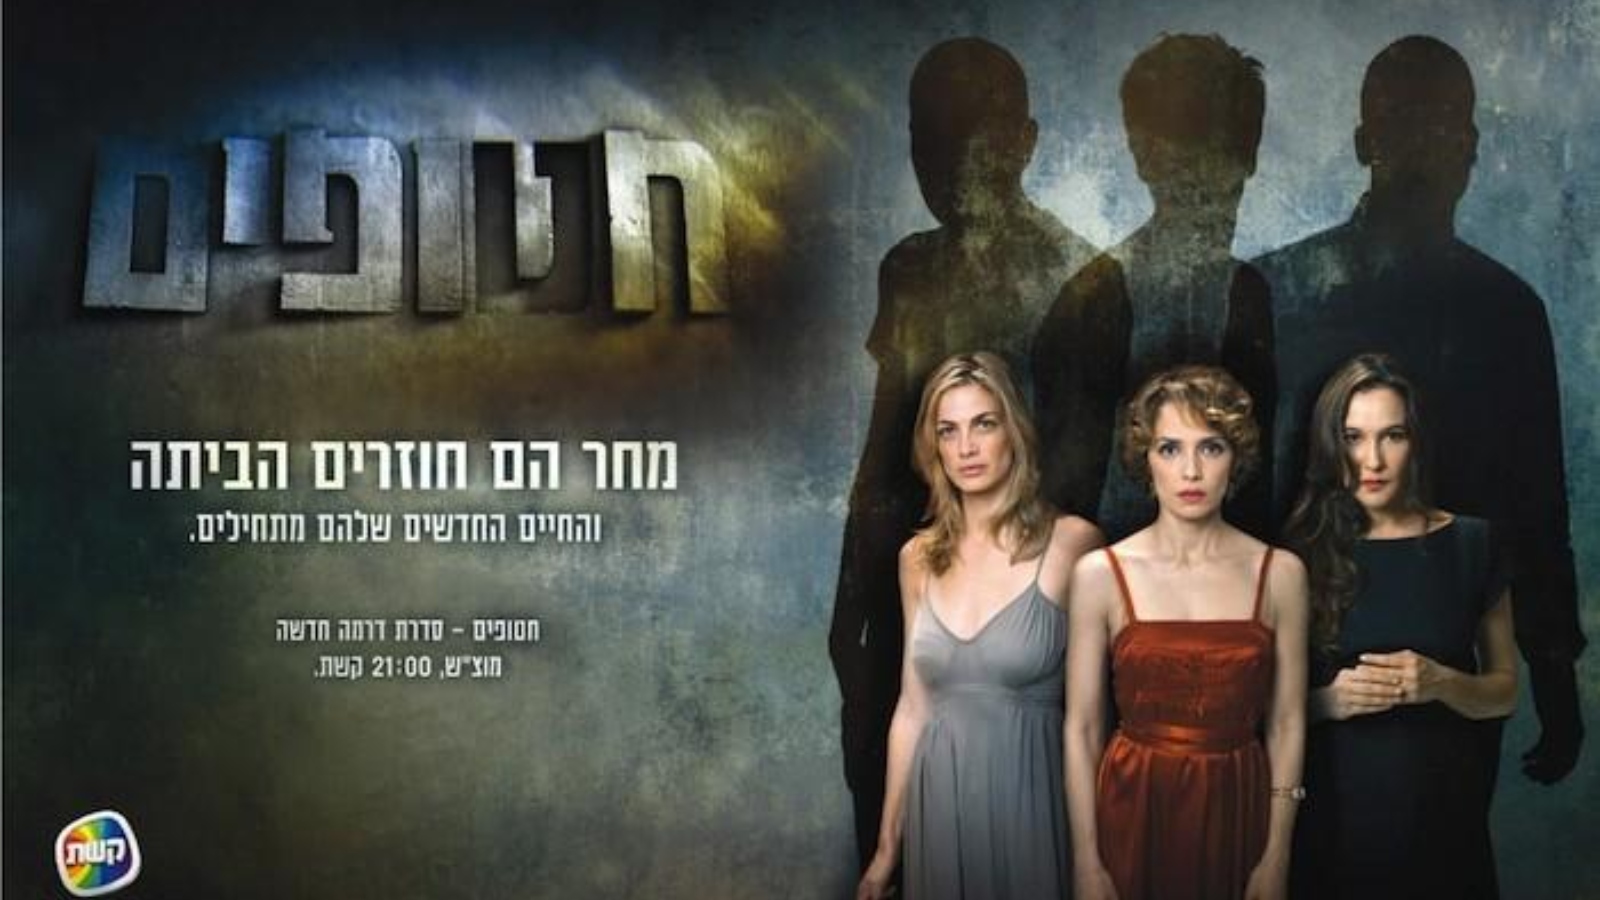 Promo for "Hatufim" from May 2013.